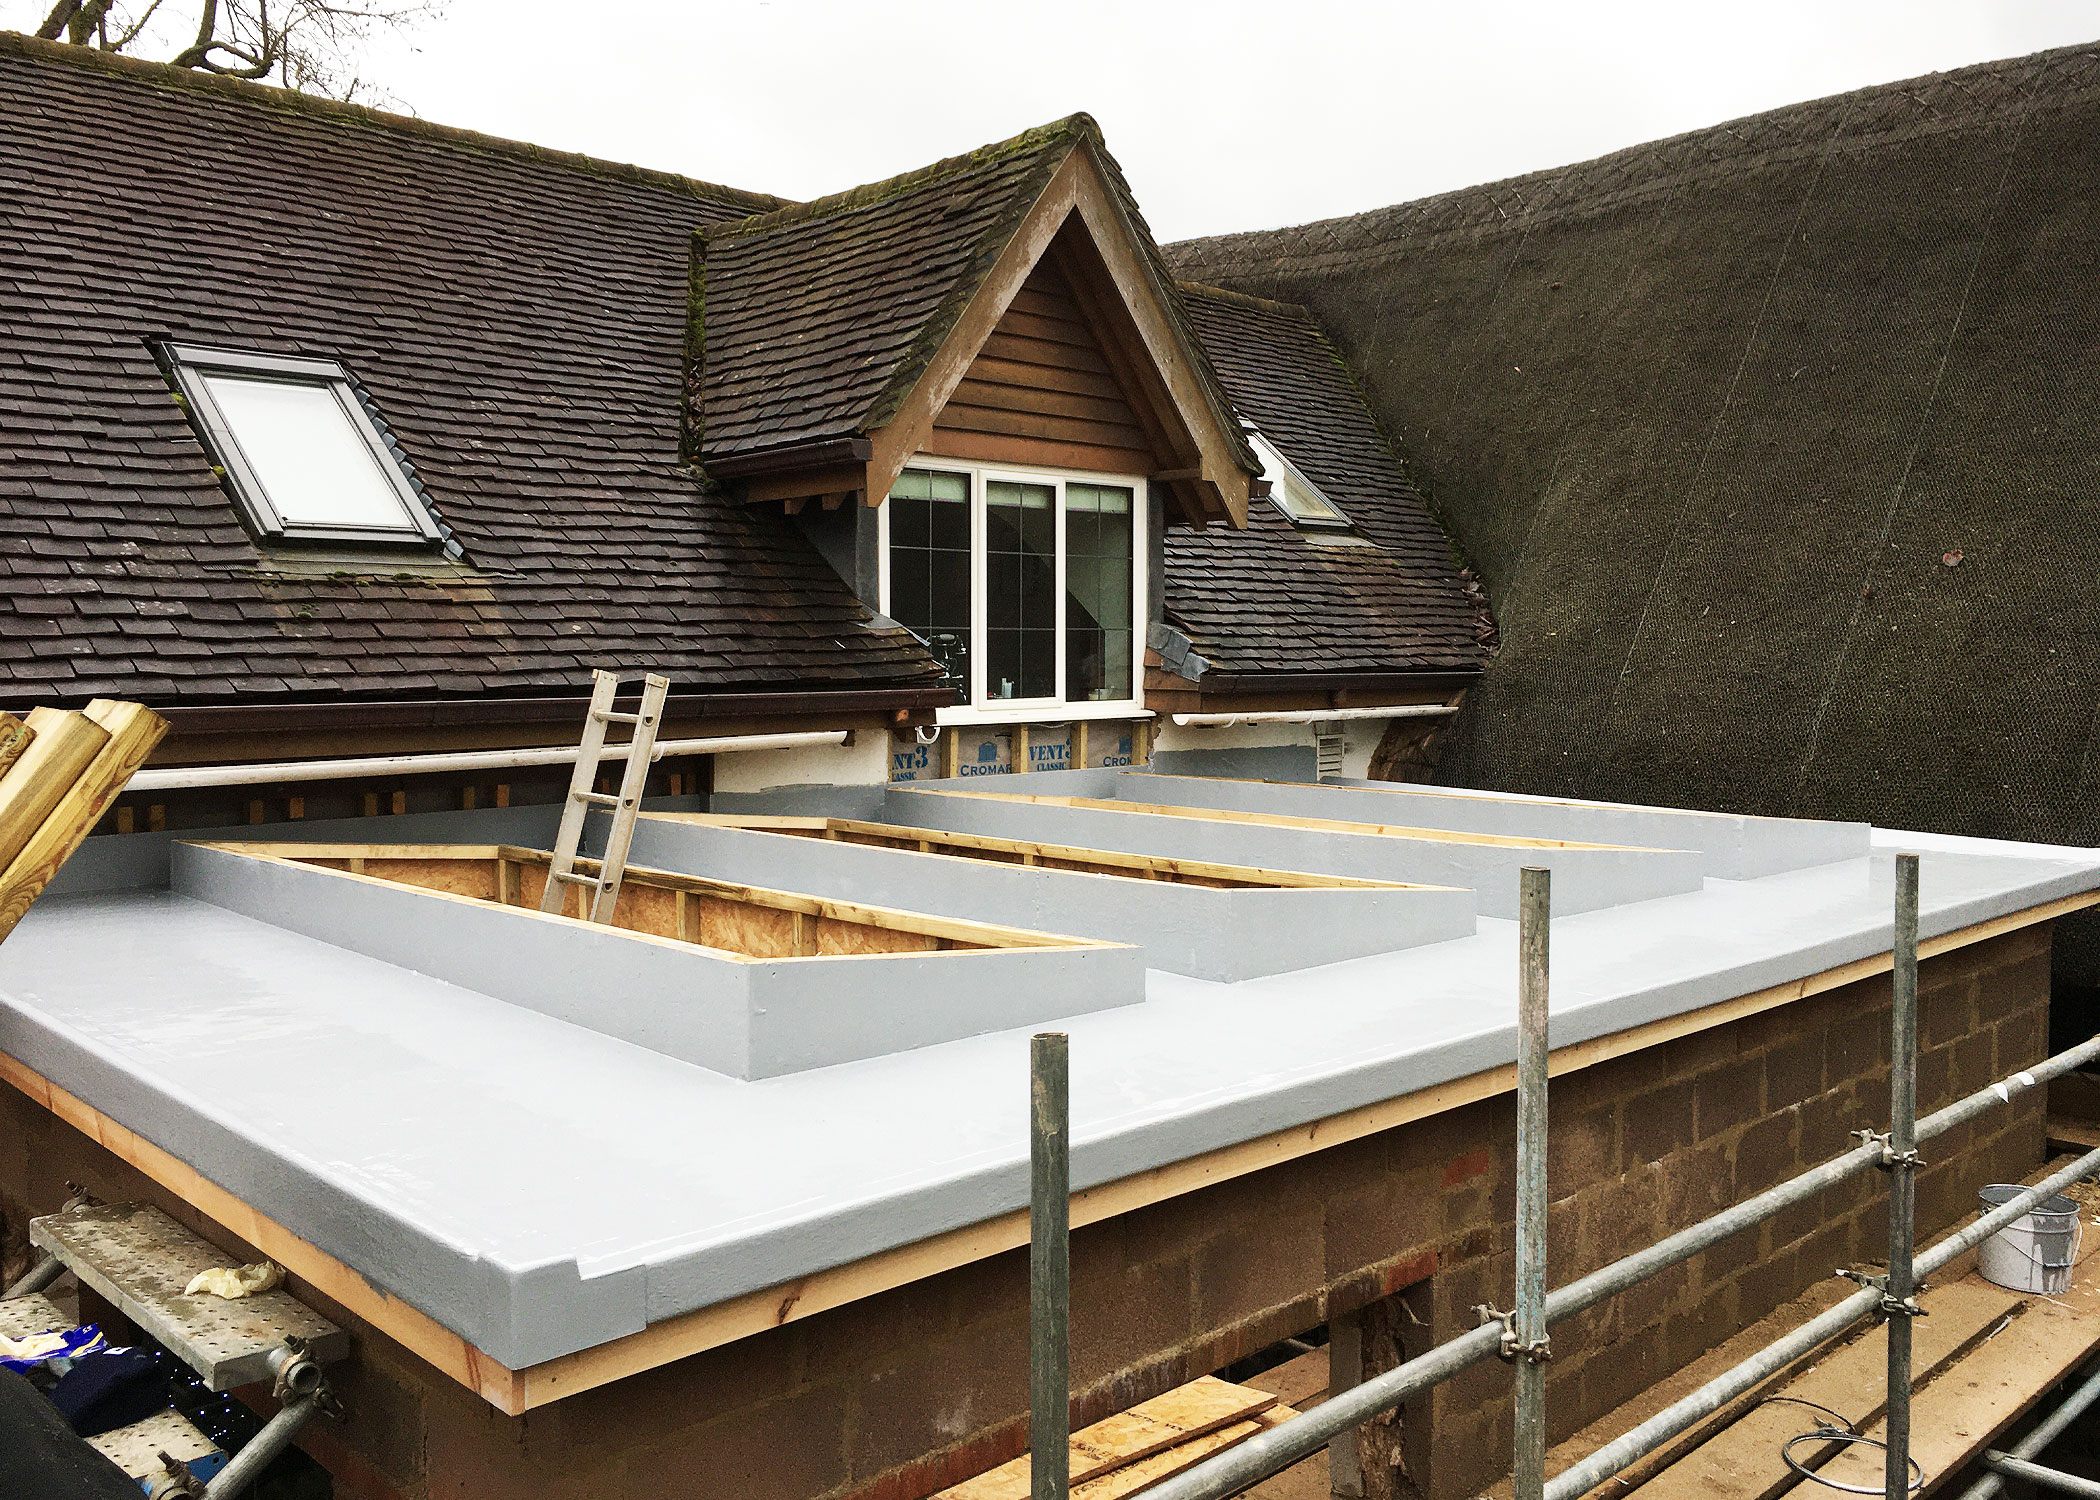 Flat roof laid by Lavisher Building and Roofing